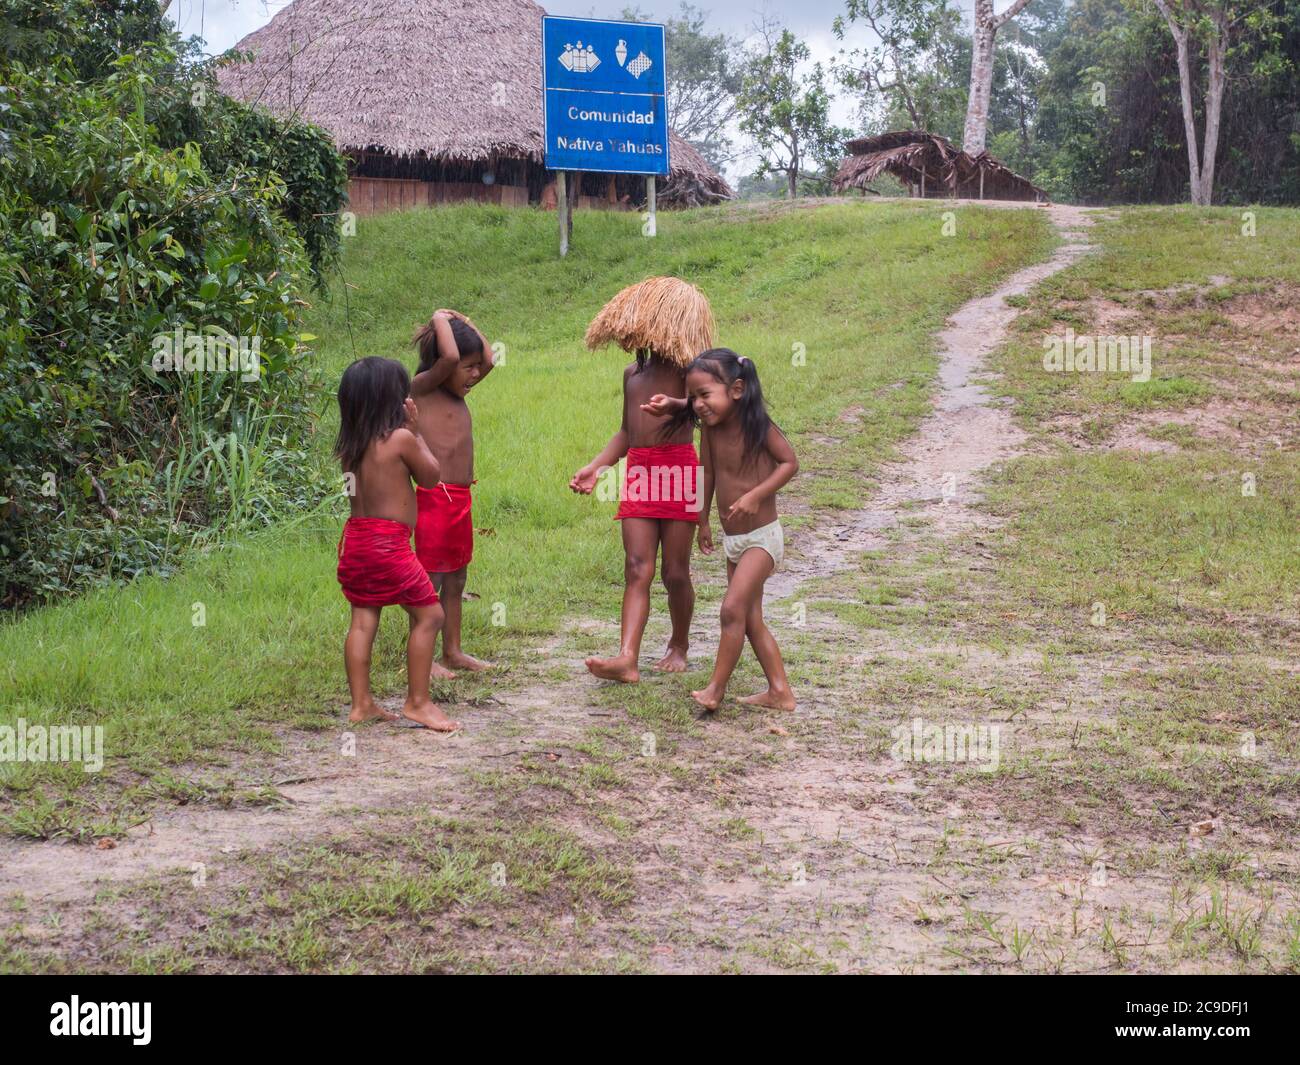 Yagua Children High Resolution Stock Photography and Images - Alamy